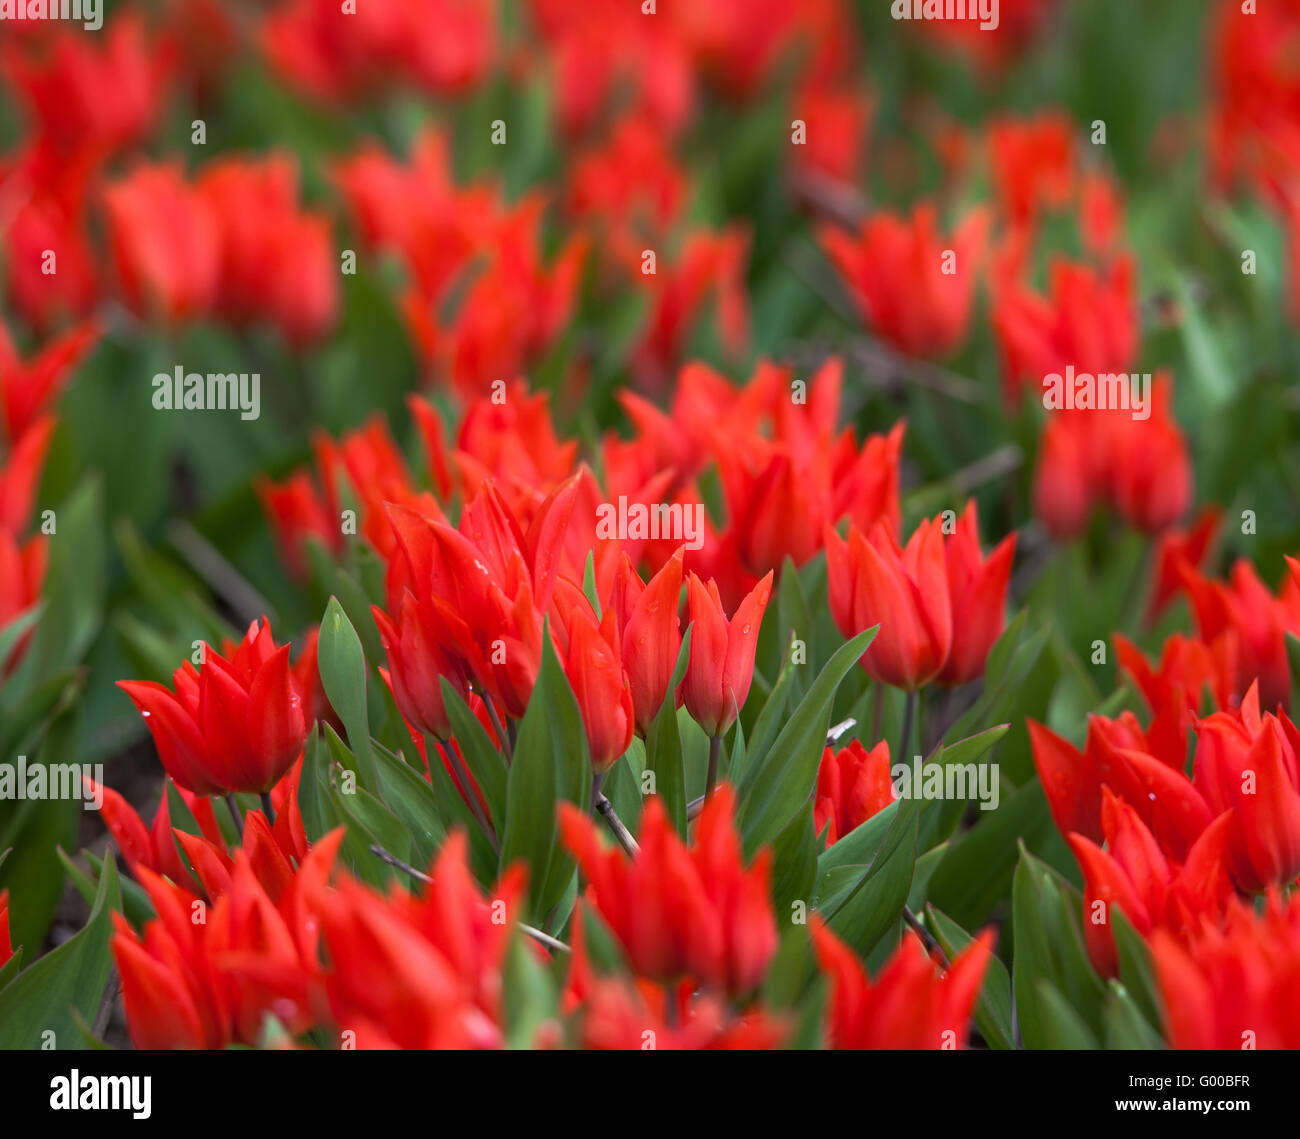 Tulip. Beautiful colorful red tulips flowers in spring garden, vibrant floral background Stock Photo